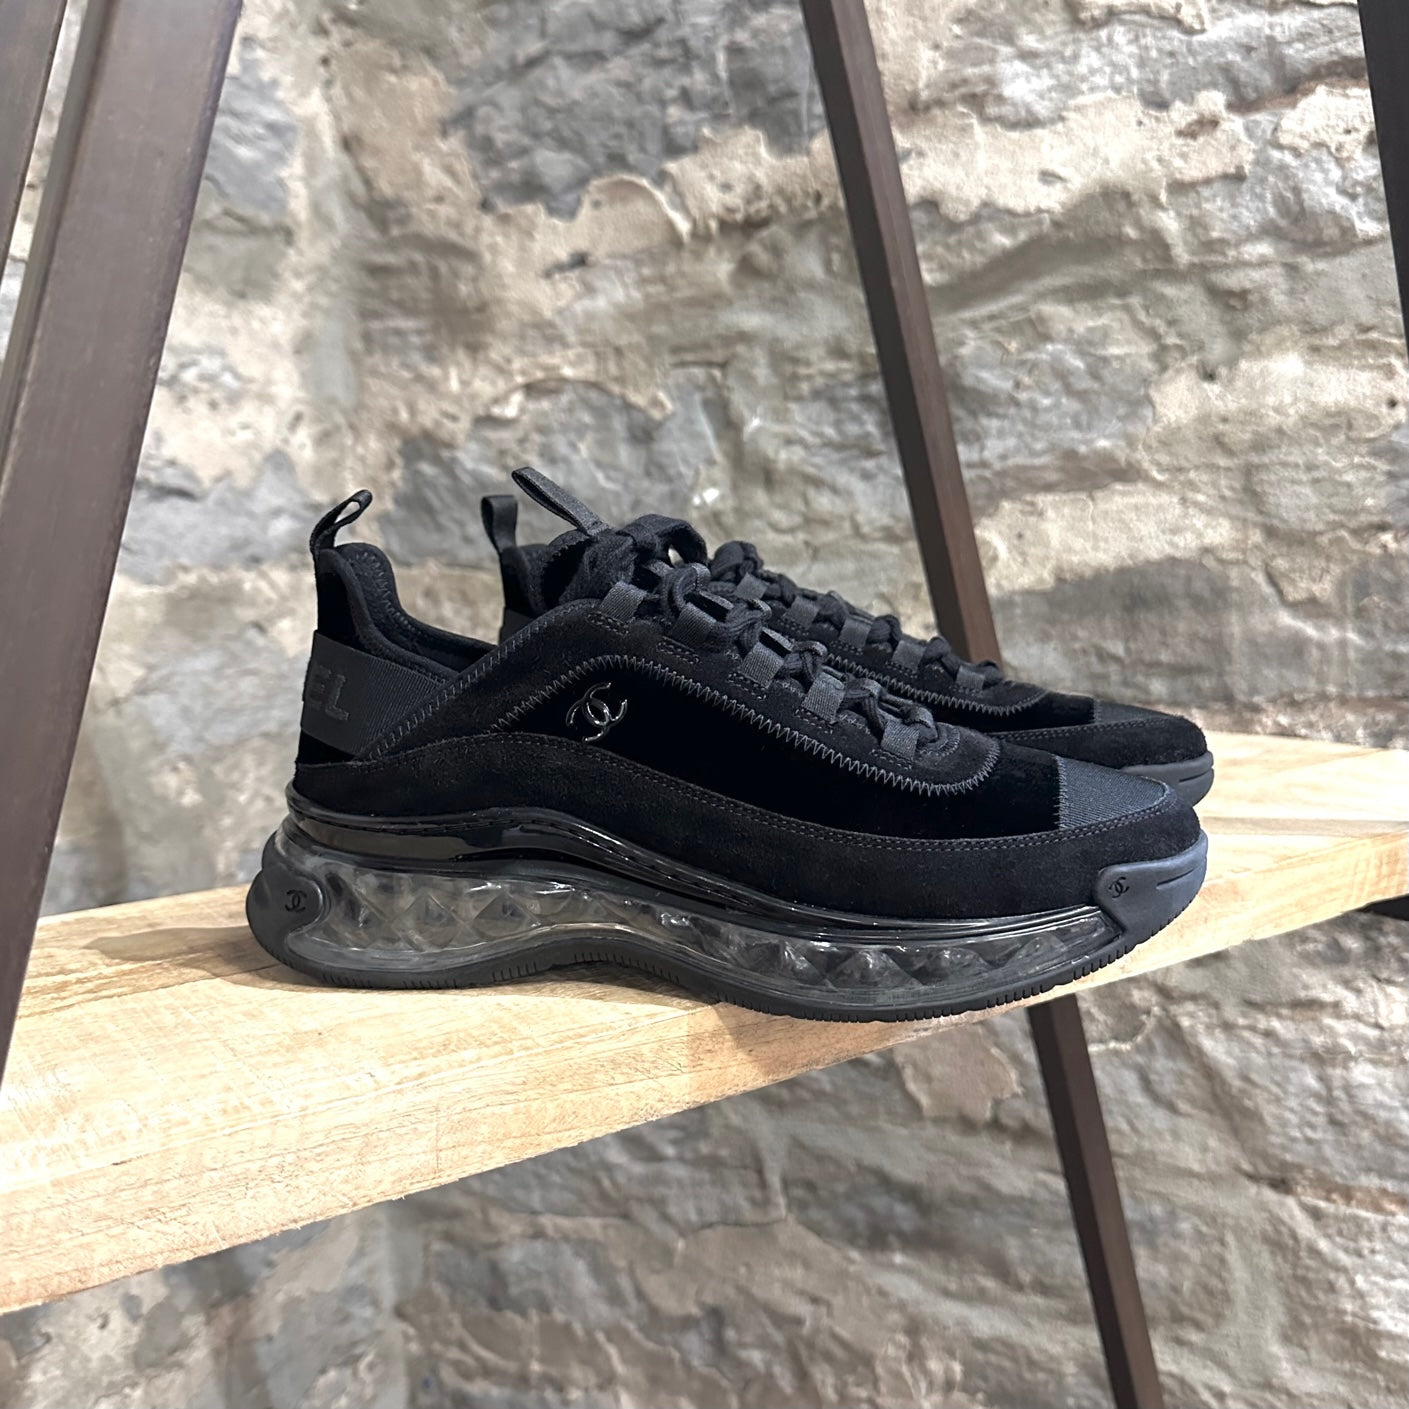 CHANEL Sport Trail Sneakers Cruise 2020 